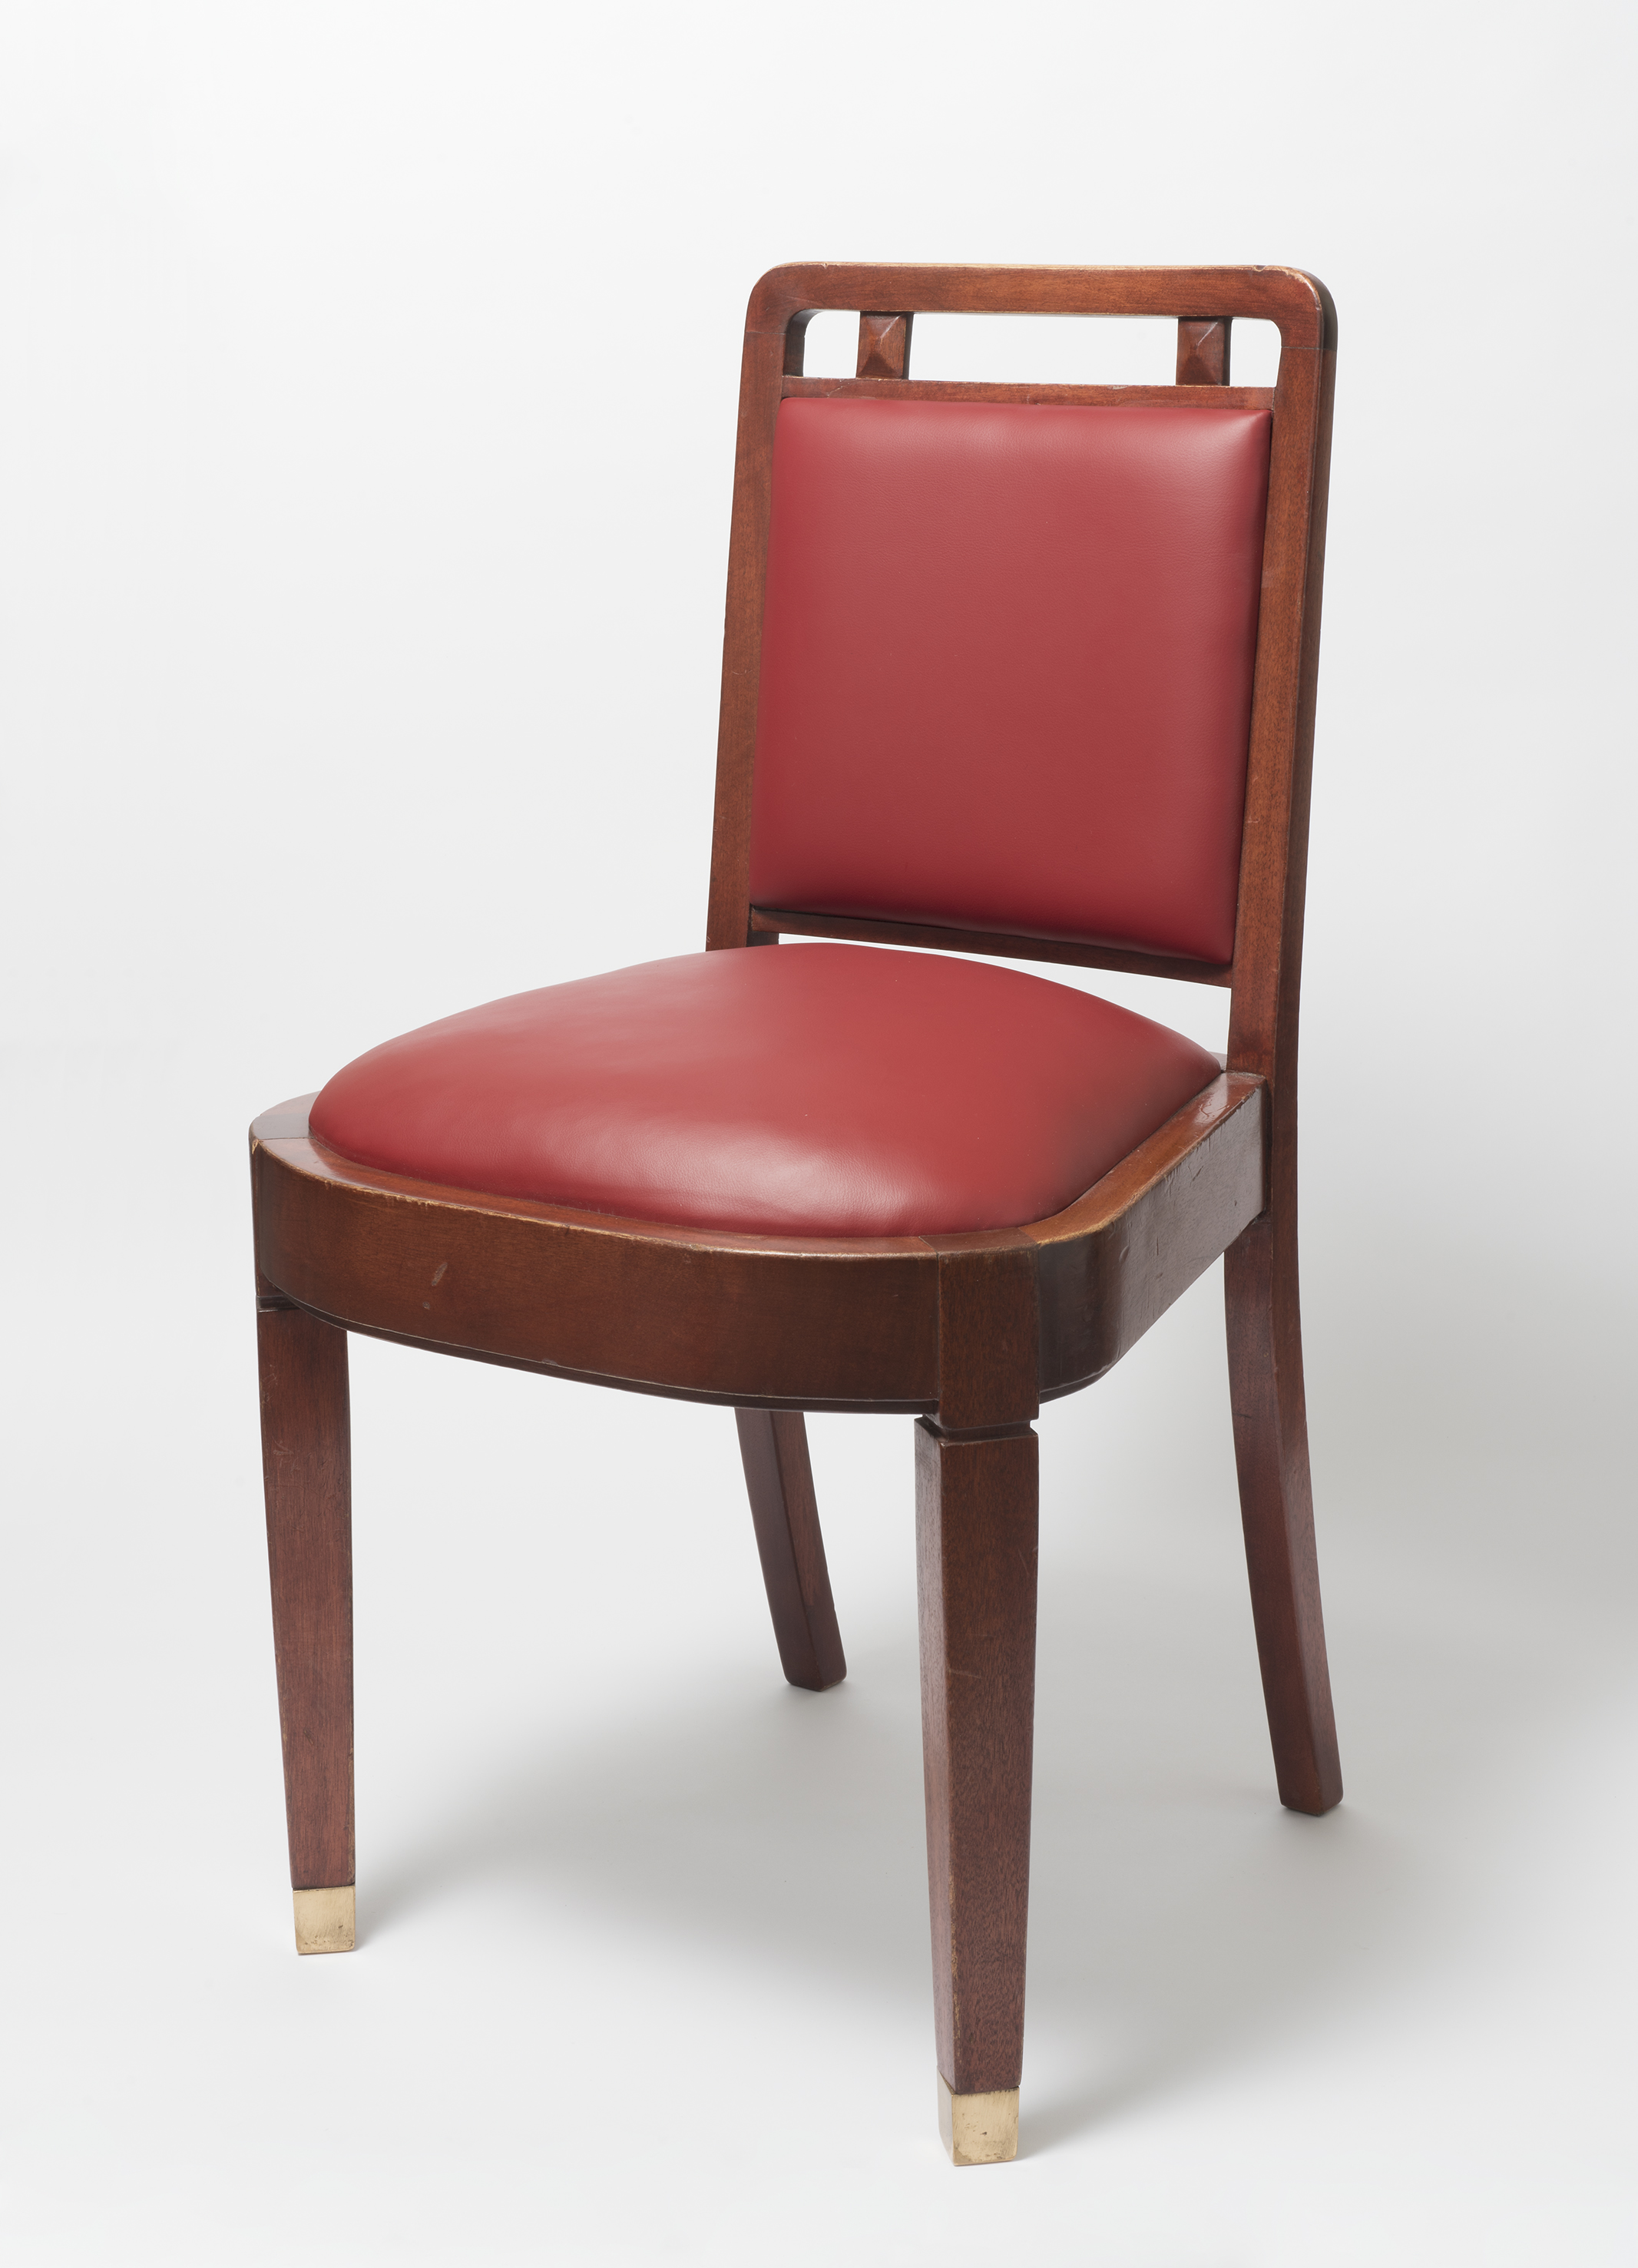 Photograph of a wooden chair with red leather seat cushion and back.